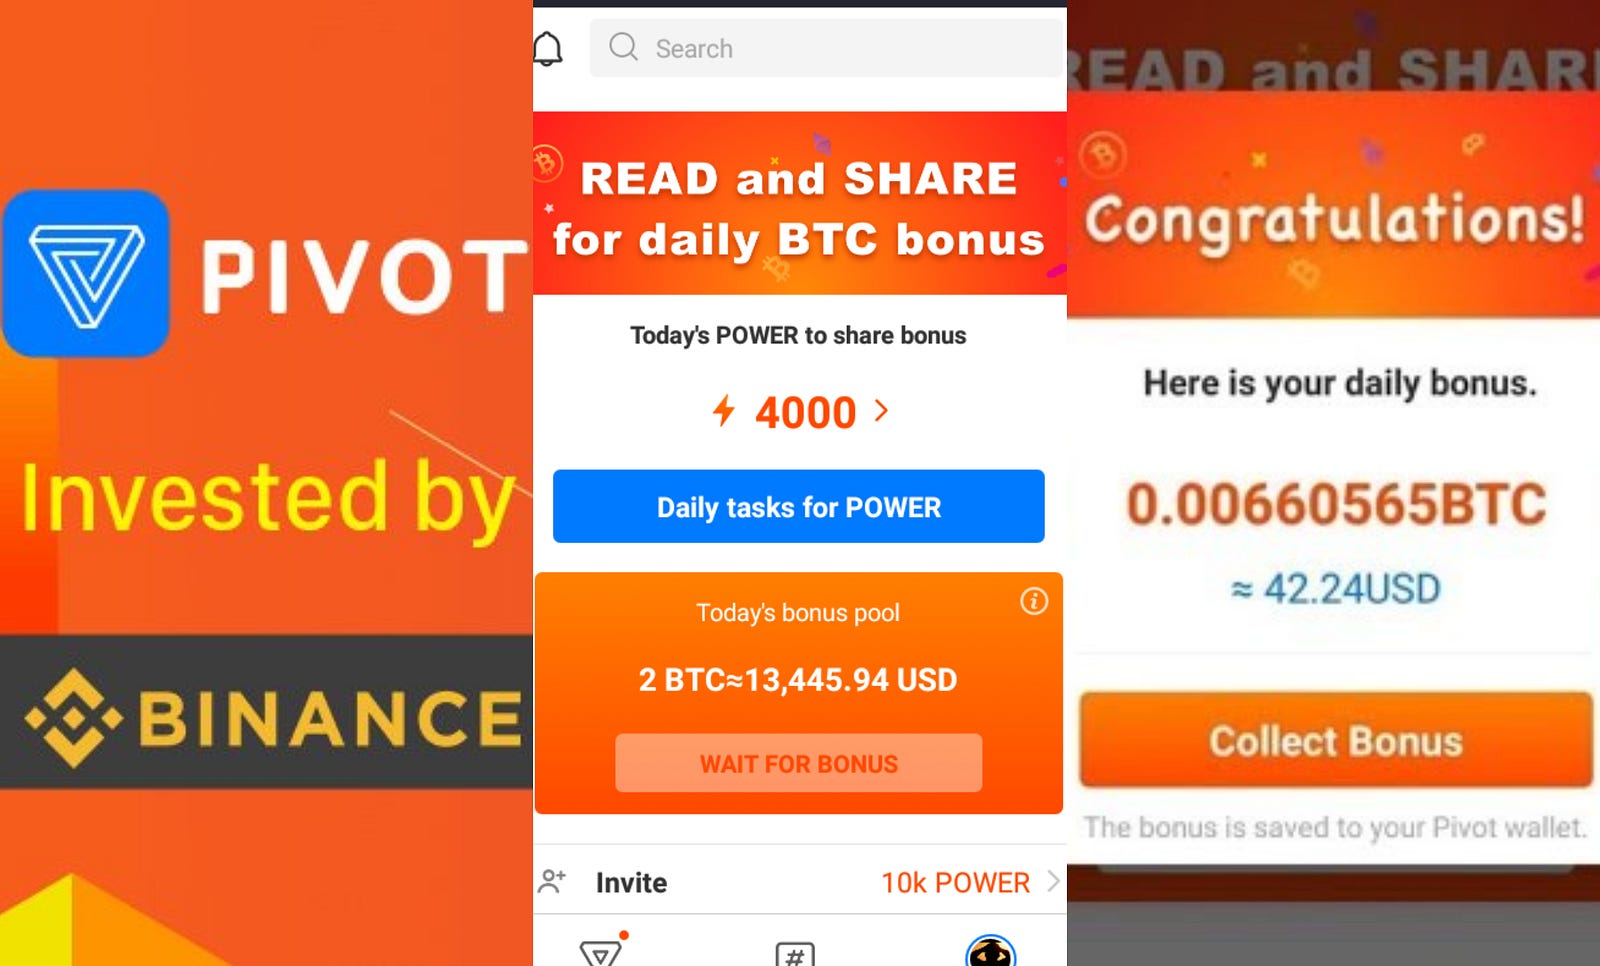 How to earn btc from pivot